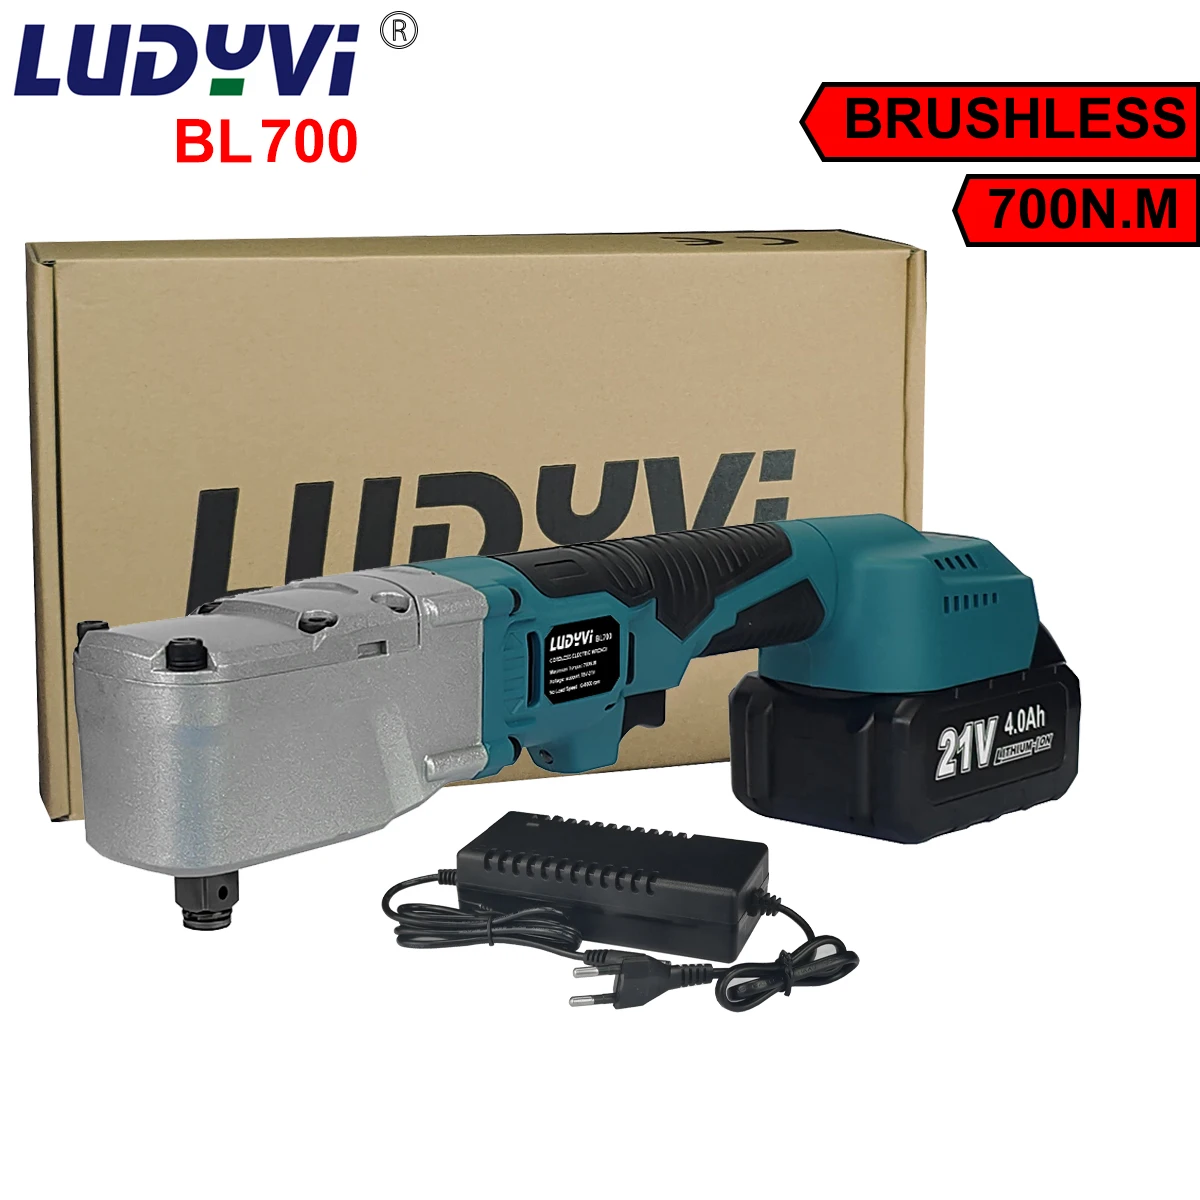 Brushless electric wrench 700N.M 90 degree right angle power tool can be used to repair the car with dismantling screws and nuts the new self leveling bl touch can be used with 3d printer artillery sidewinder x2 and genius pro